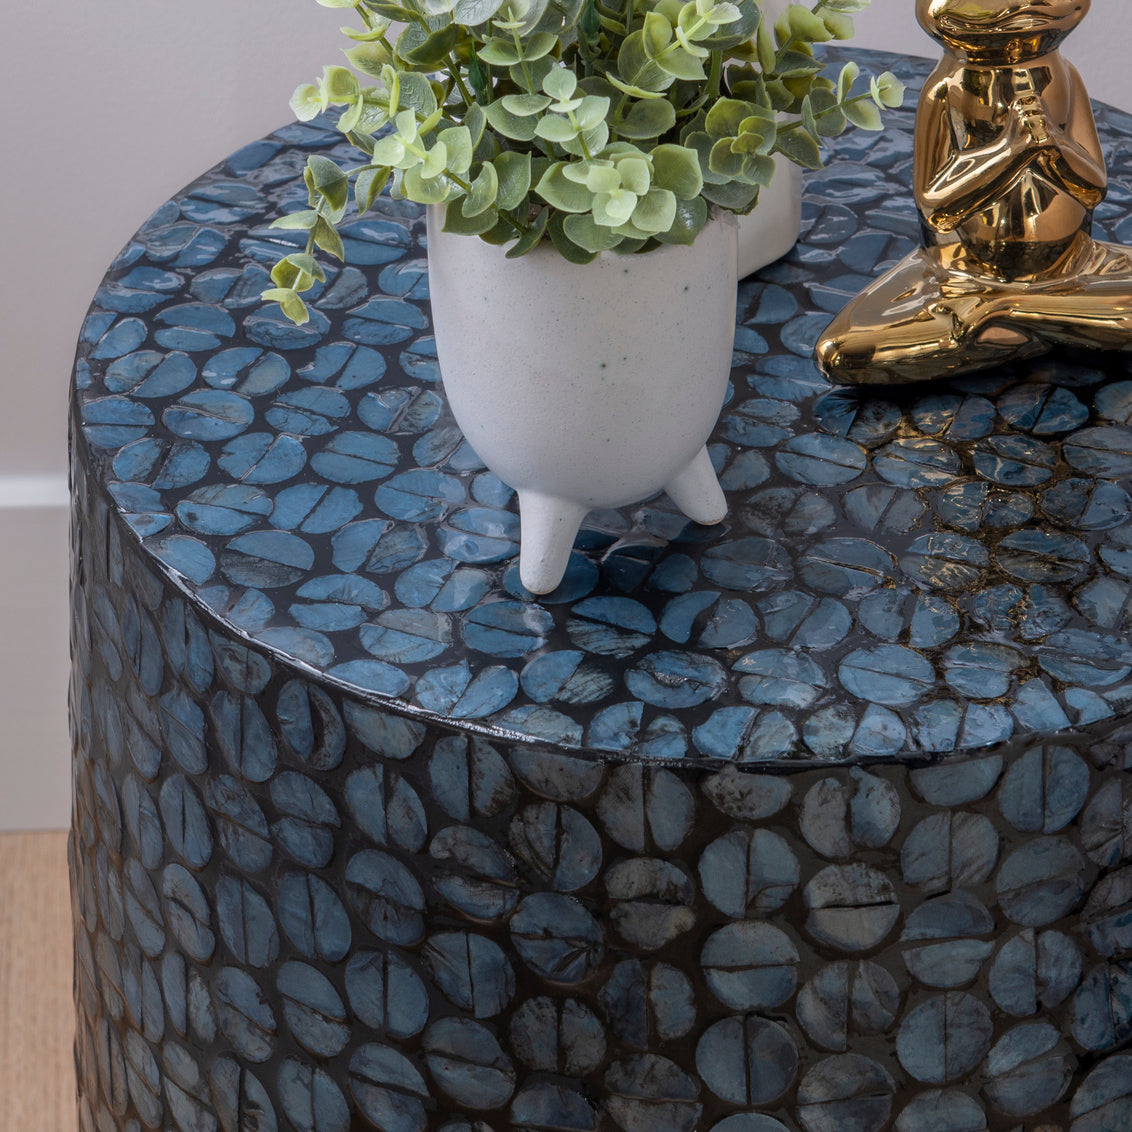 Stunning Black Shimmer Accent Square Side Table